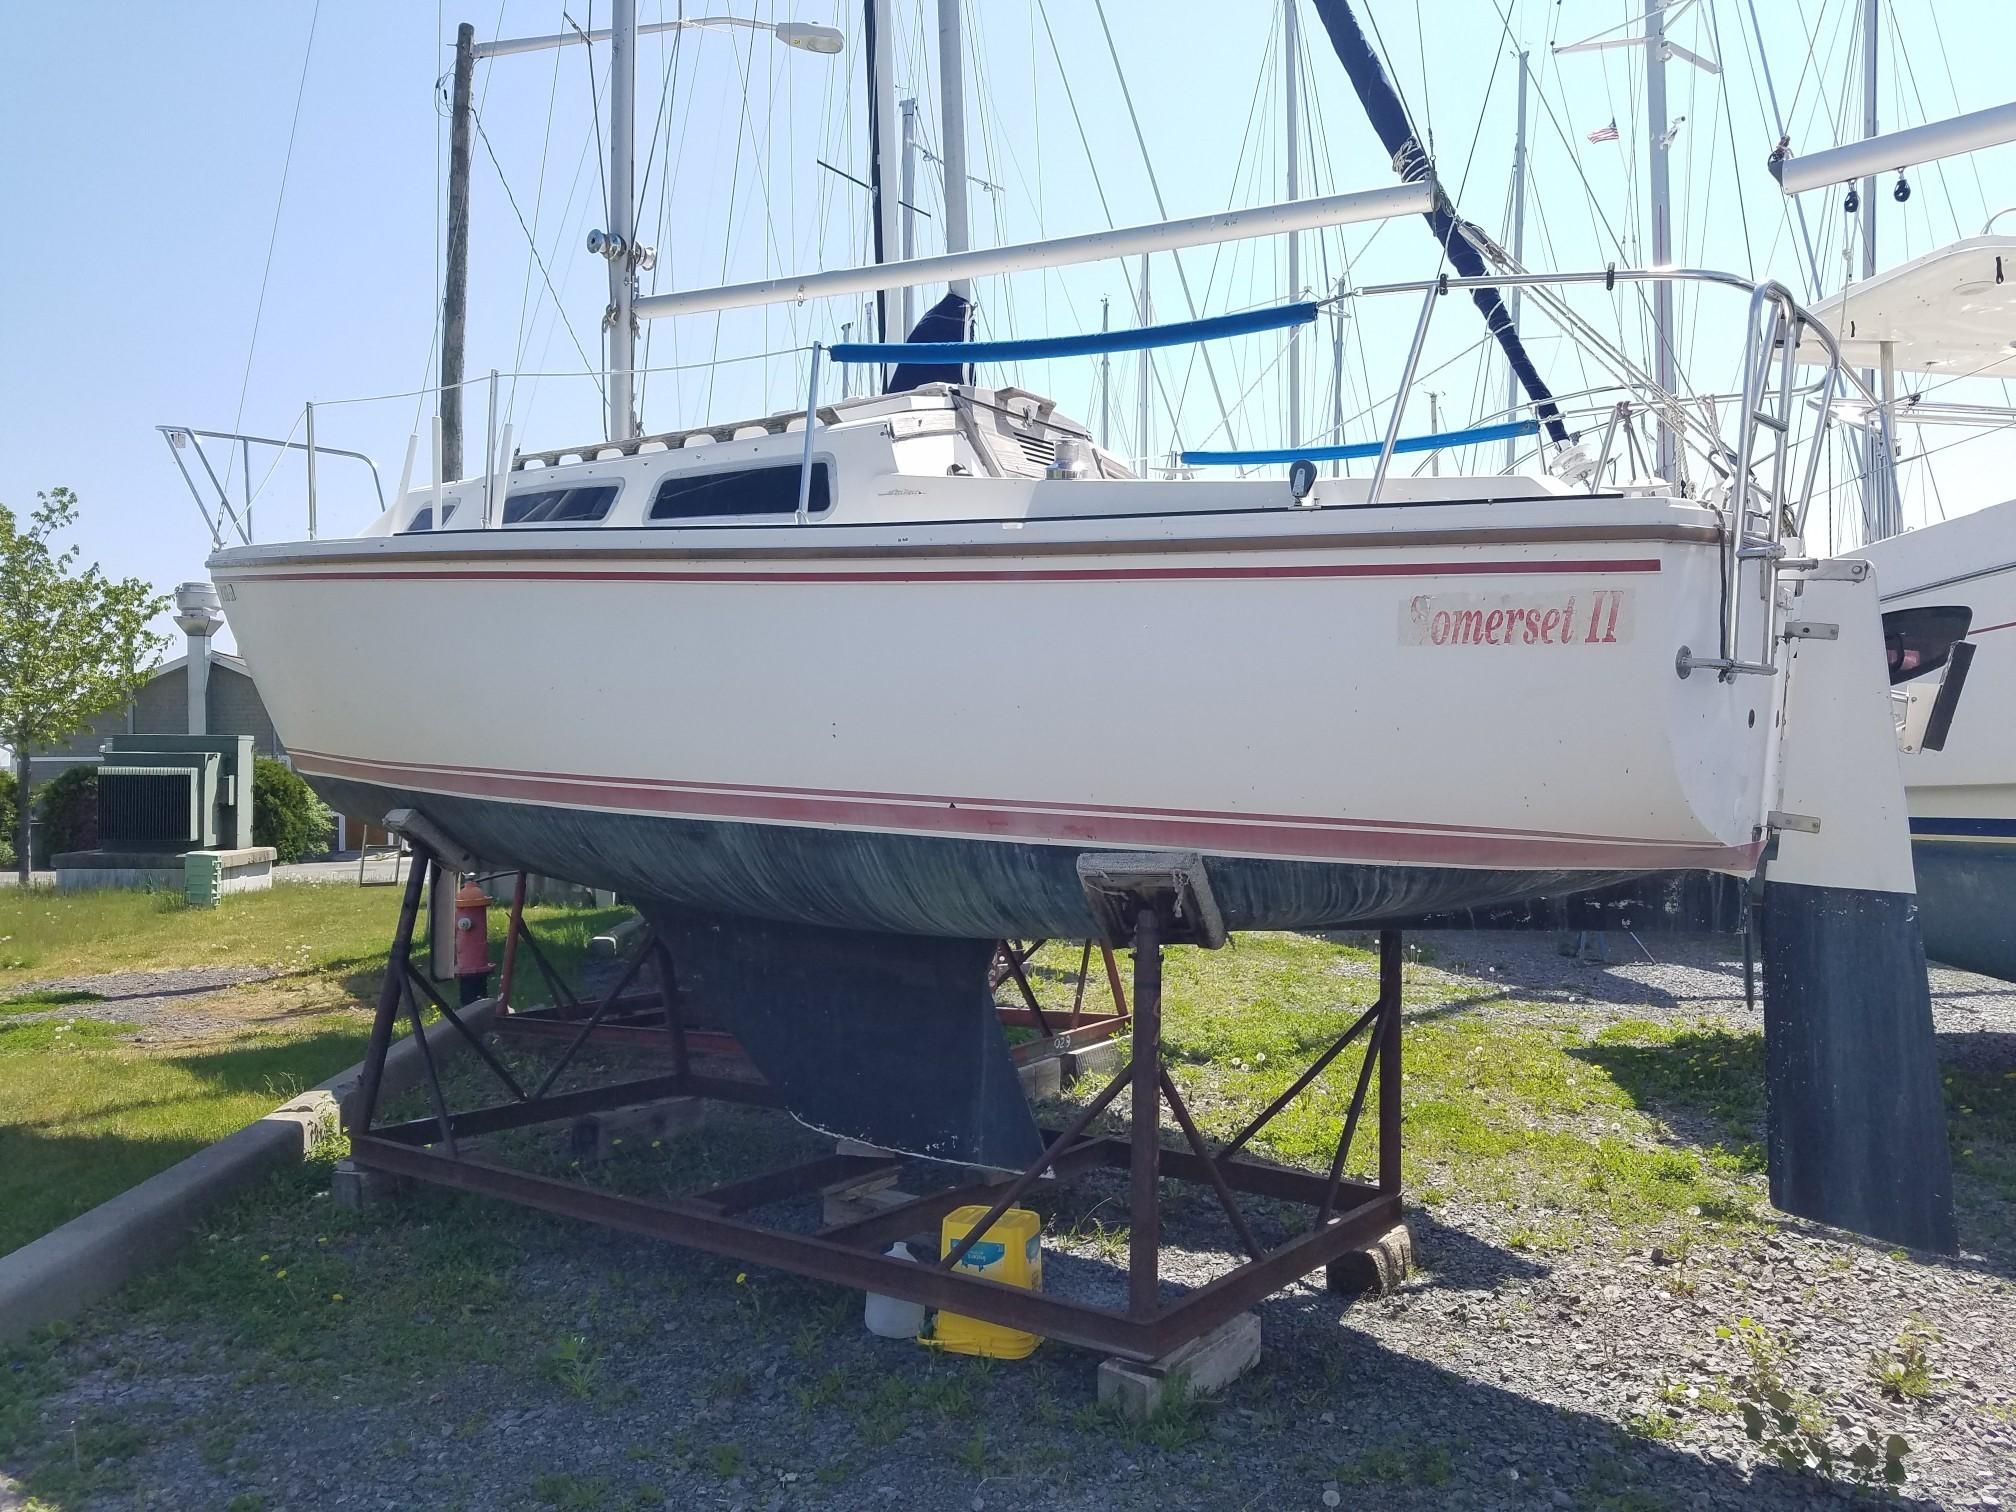 25 ft catalina sailboat for sale